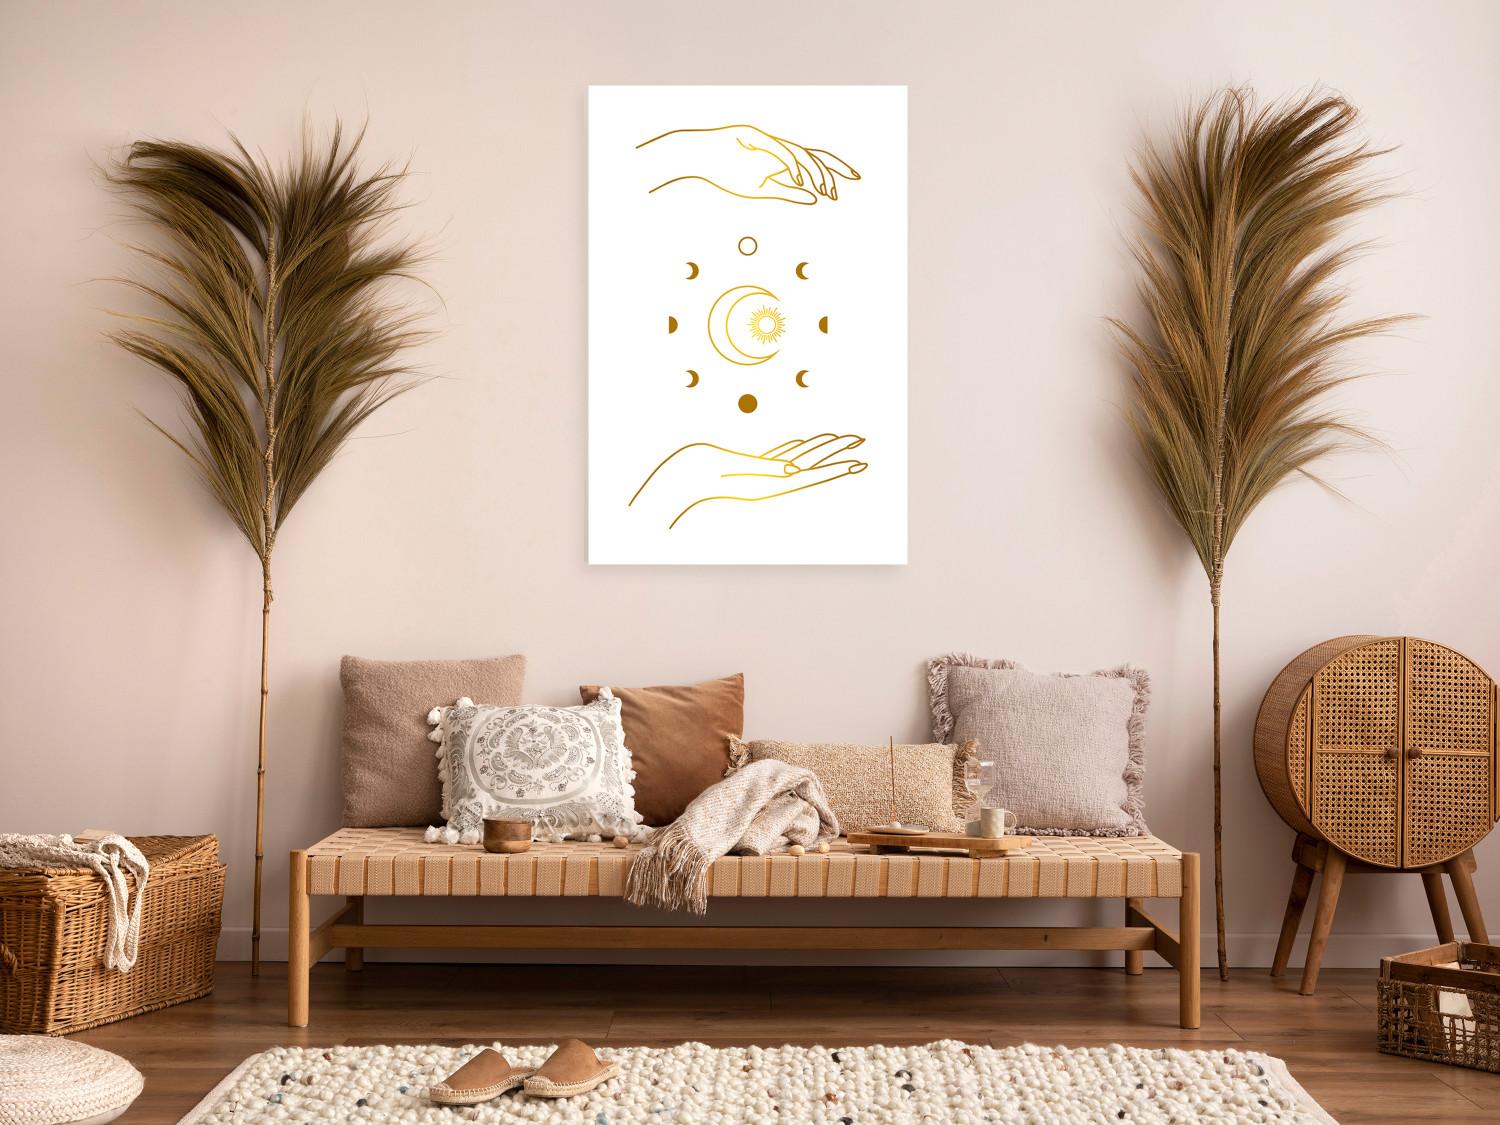 Cuadro decorativo Magic Symbols - Golden Hands and All Phases of the Moon